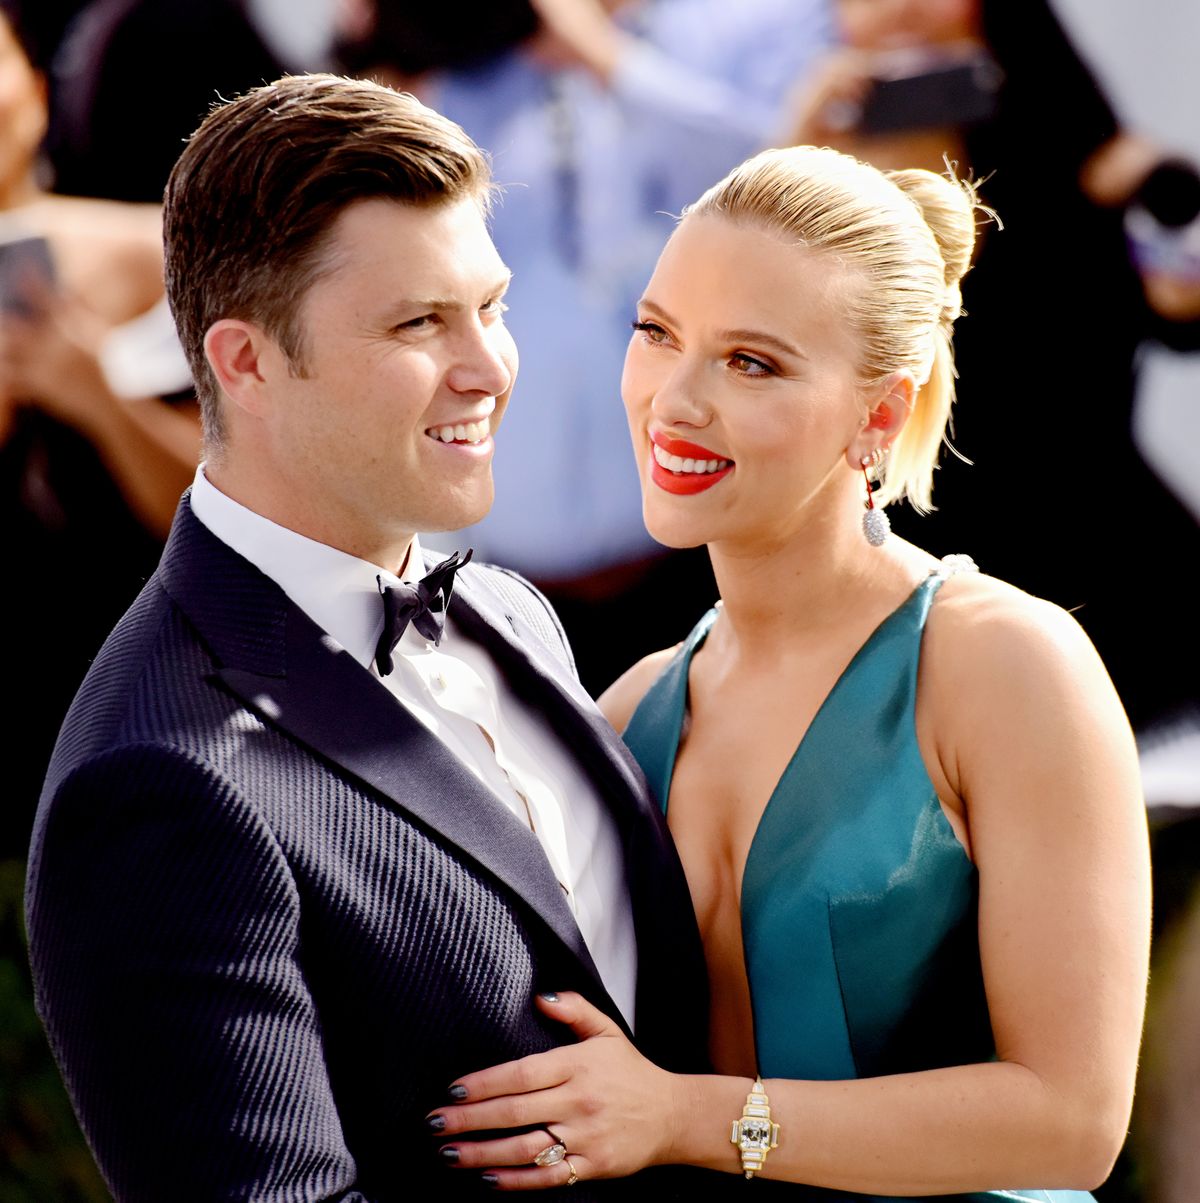 Colin Jost Confirms Scarlett Johansson Is Pregnant: 'We're Excited' –  Hollywood Life